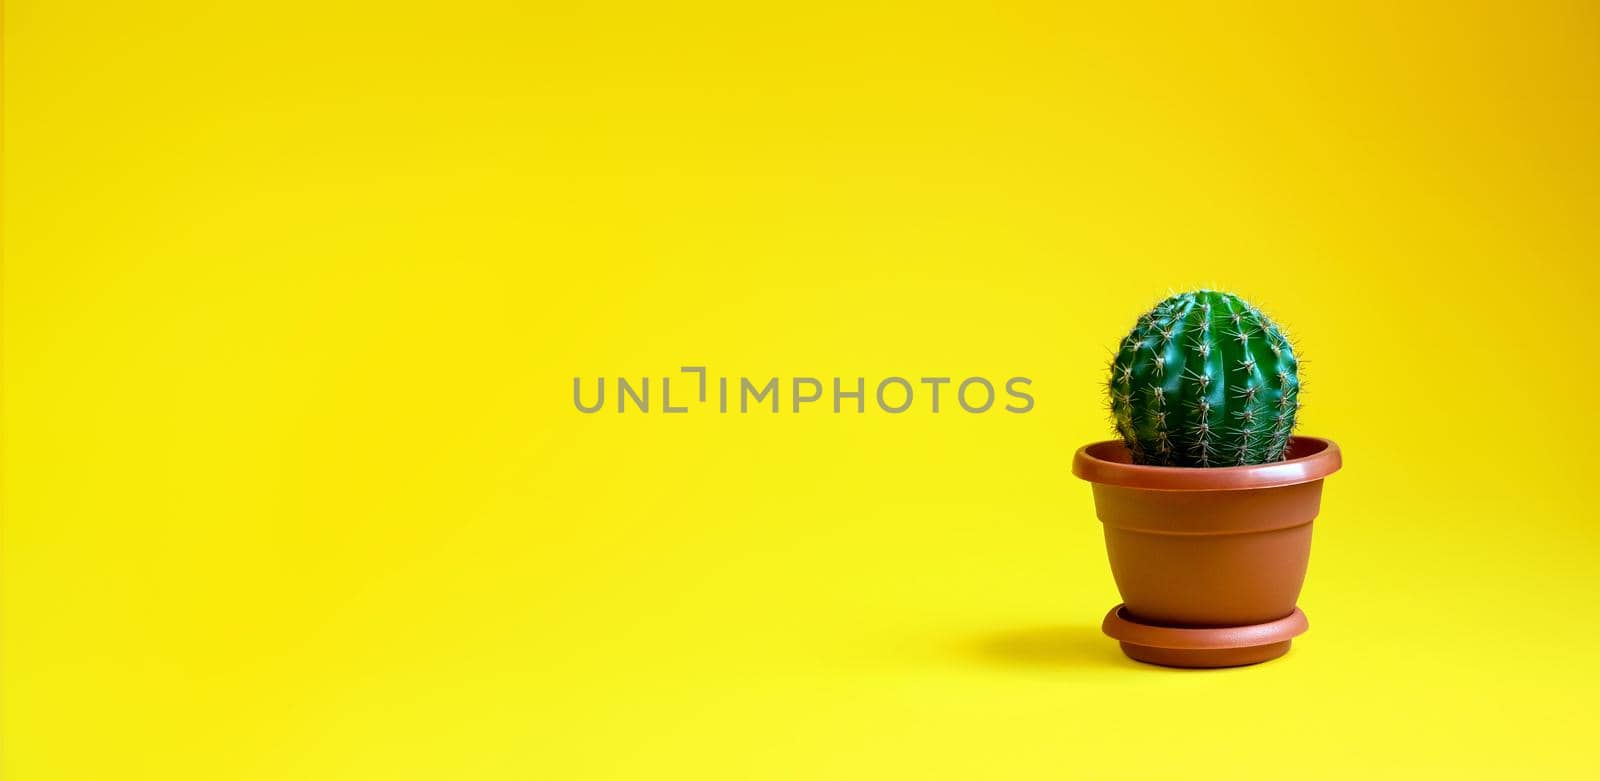 Small Decorative Cactus in Pot on Yellow Background. House Plant. Minimalism Concept. Banner. Copy Space For Your Text